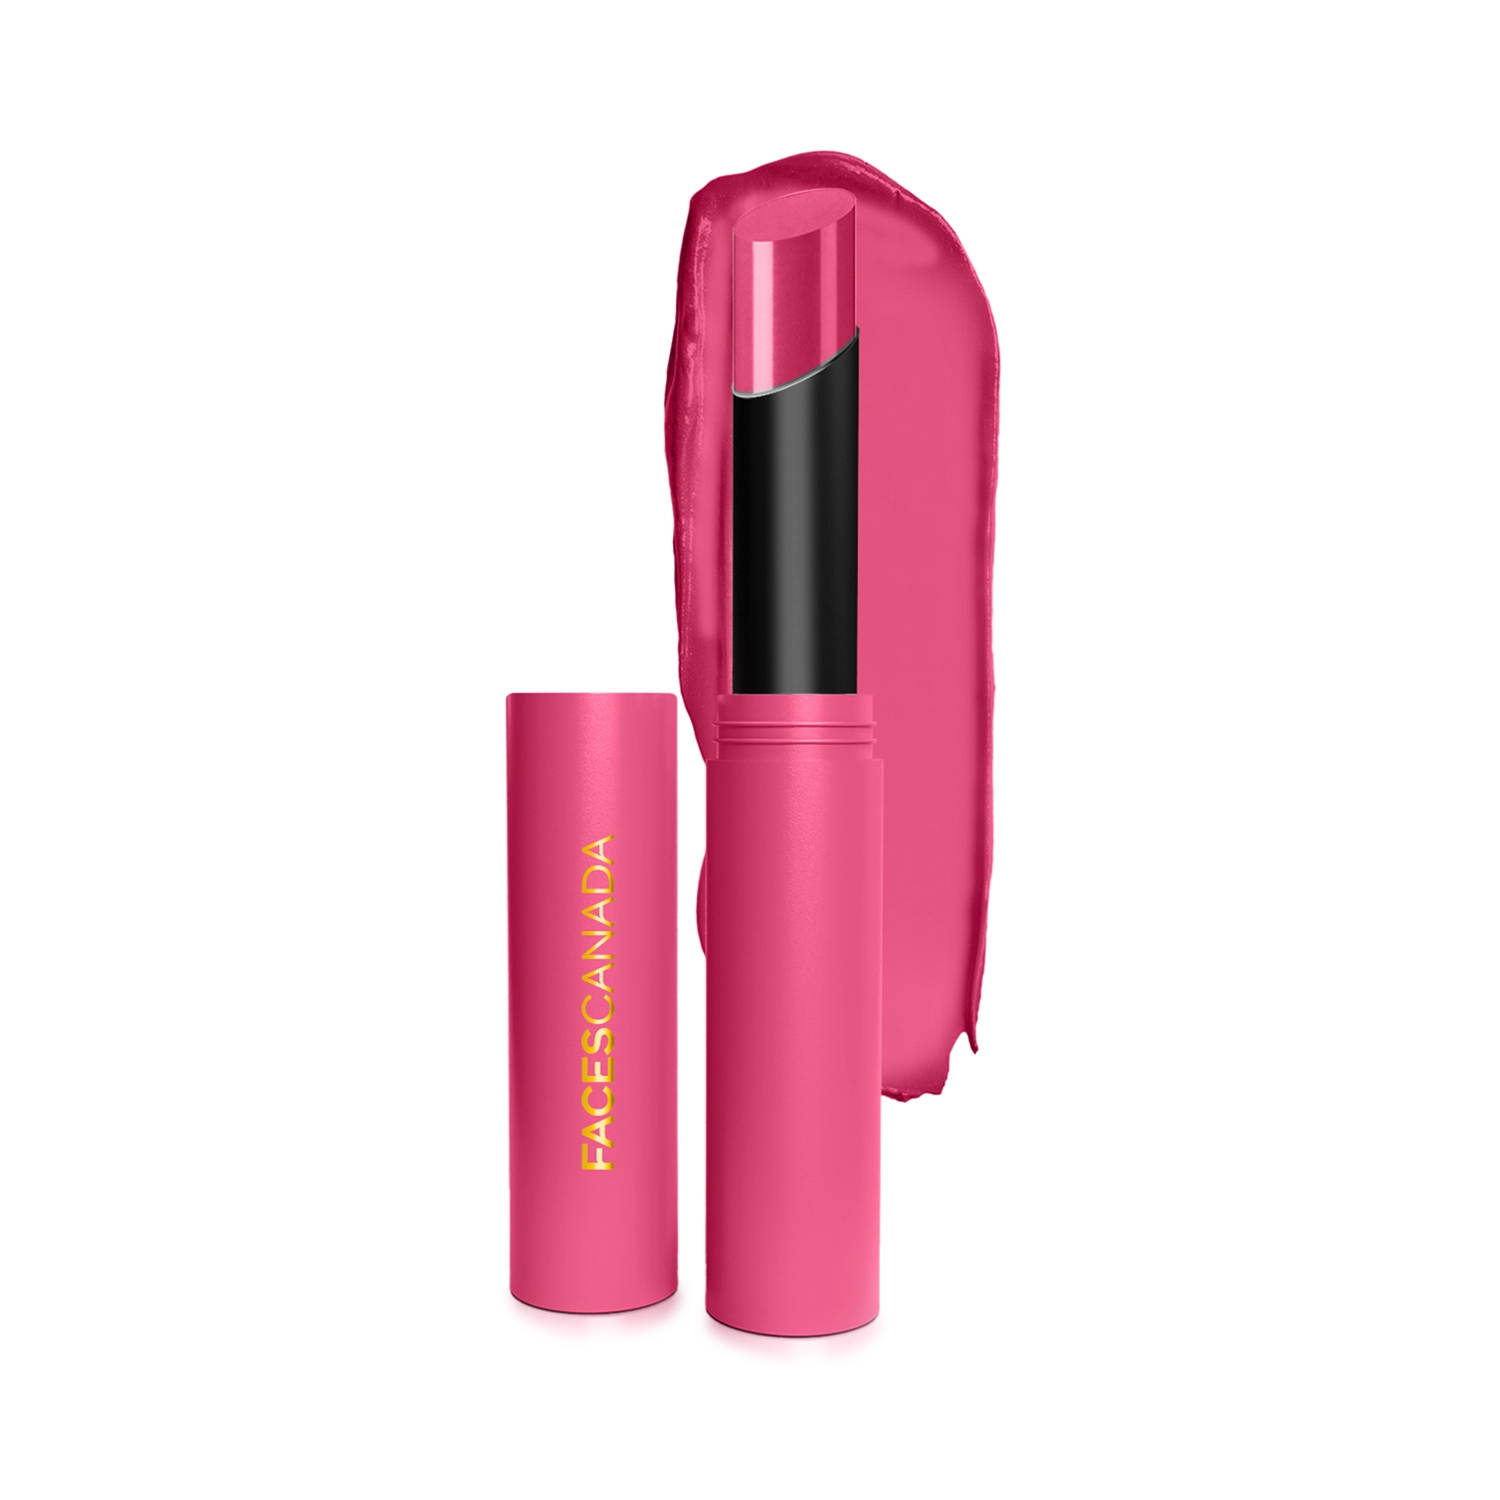 Faces Canada 3-In-1 Long Stay Matte Lipstick - 04 Bubblegum Pink (2g)